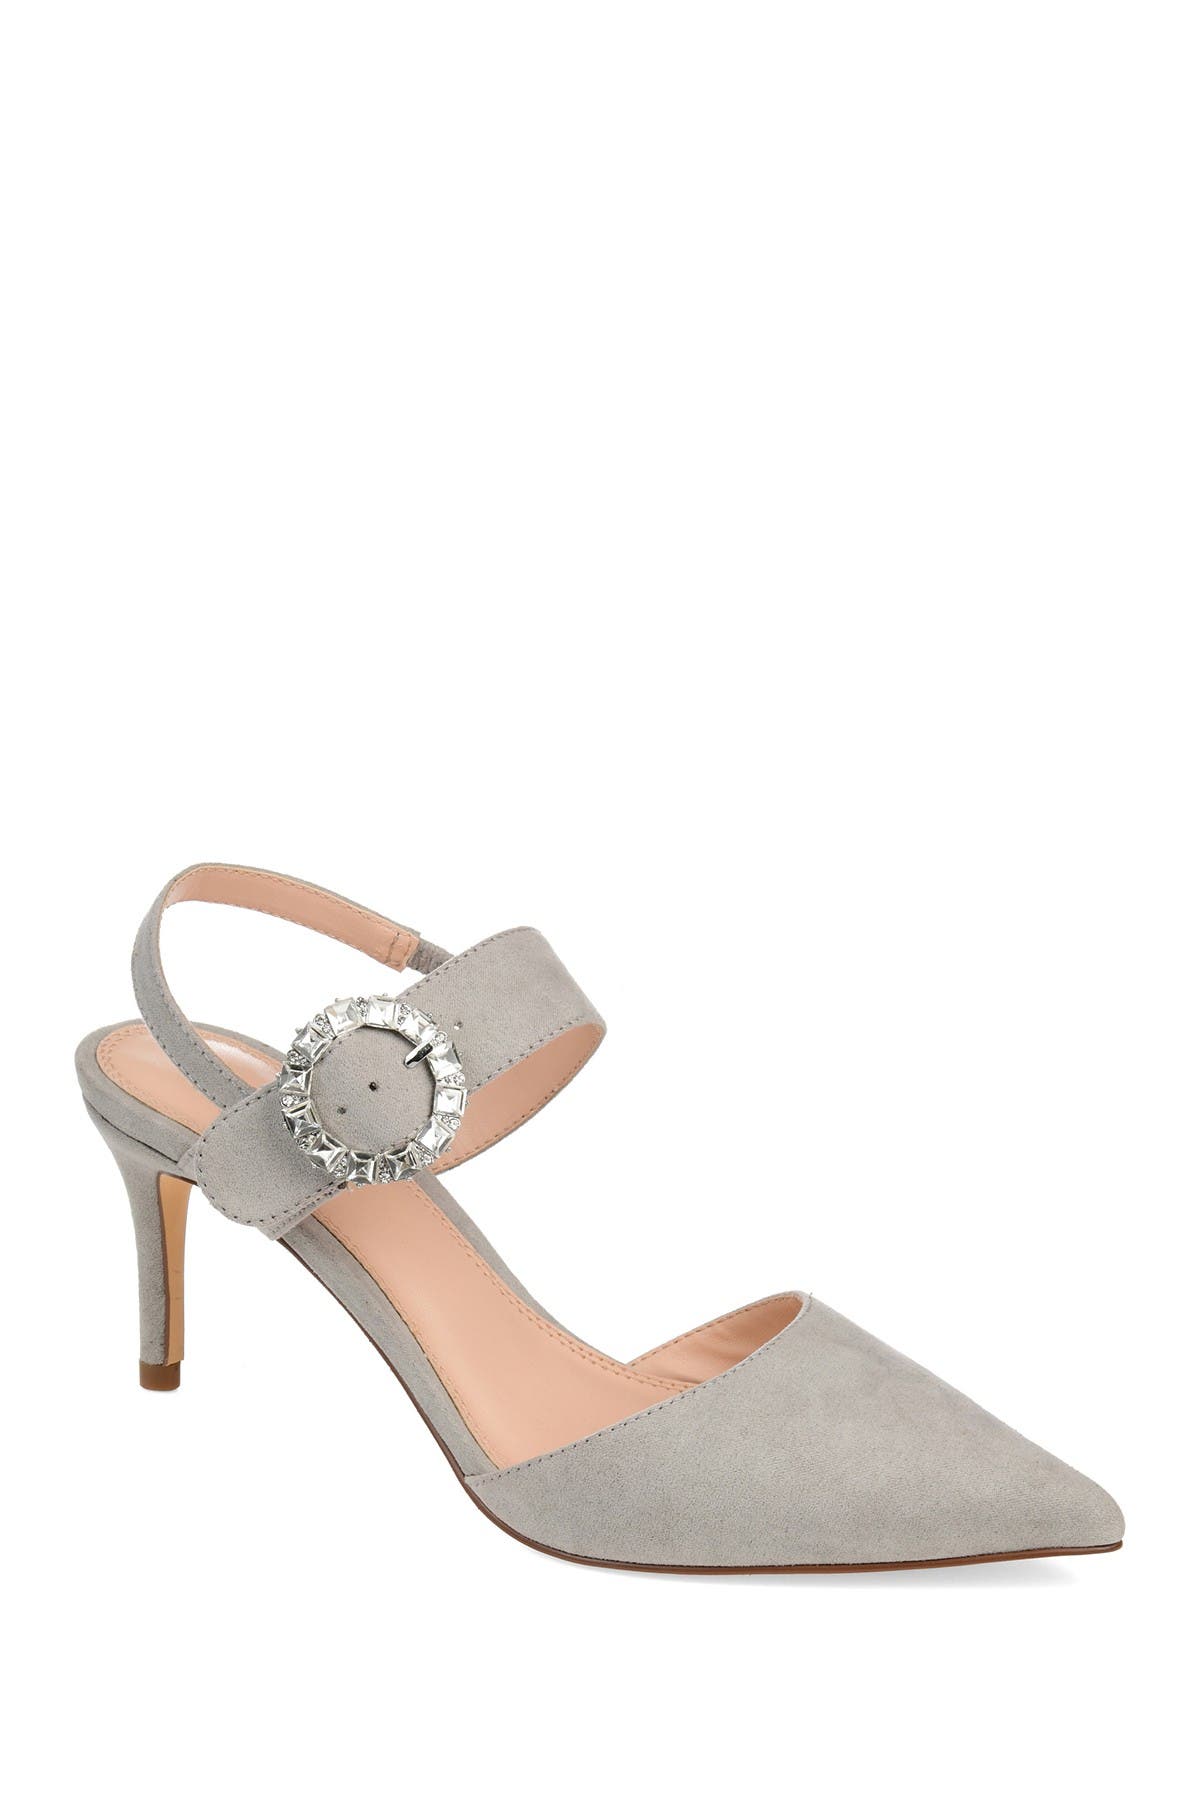 JOURNEE Collection | Cecelia Pointed Toe Pump | Nordstrom Rack